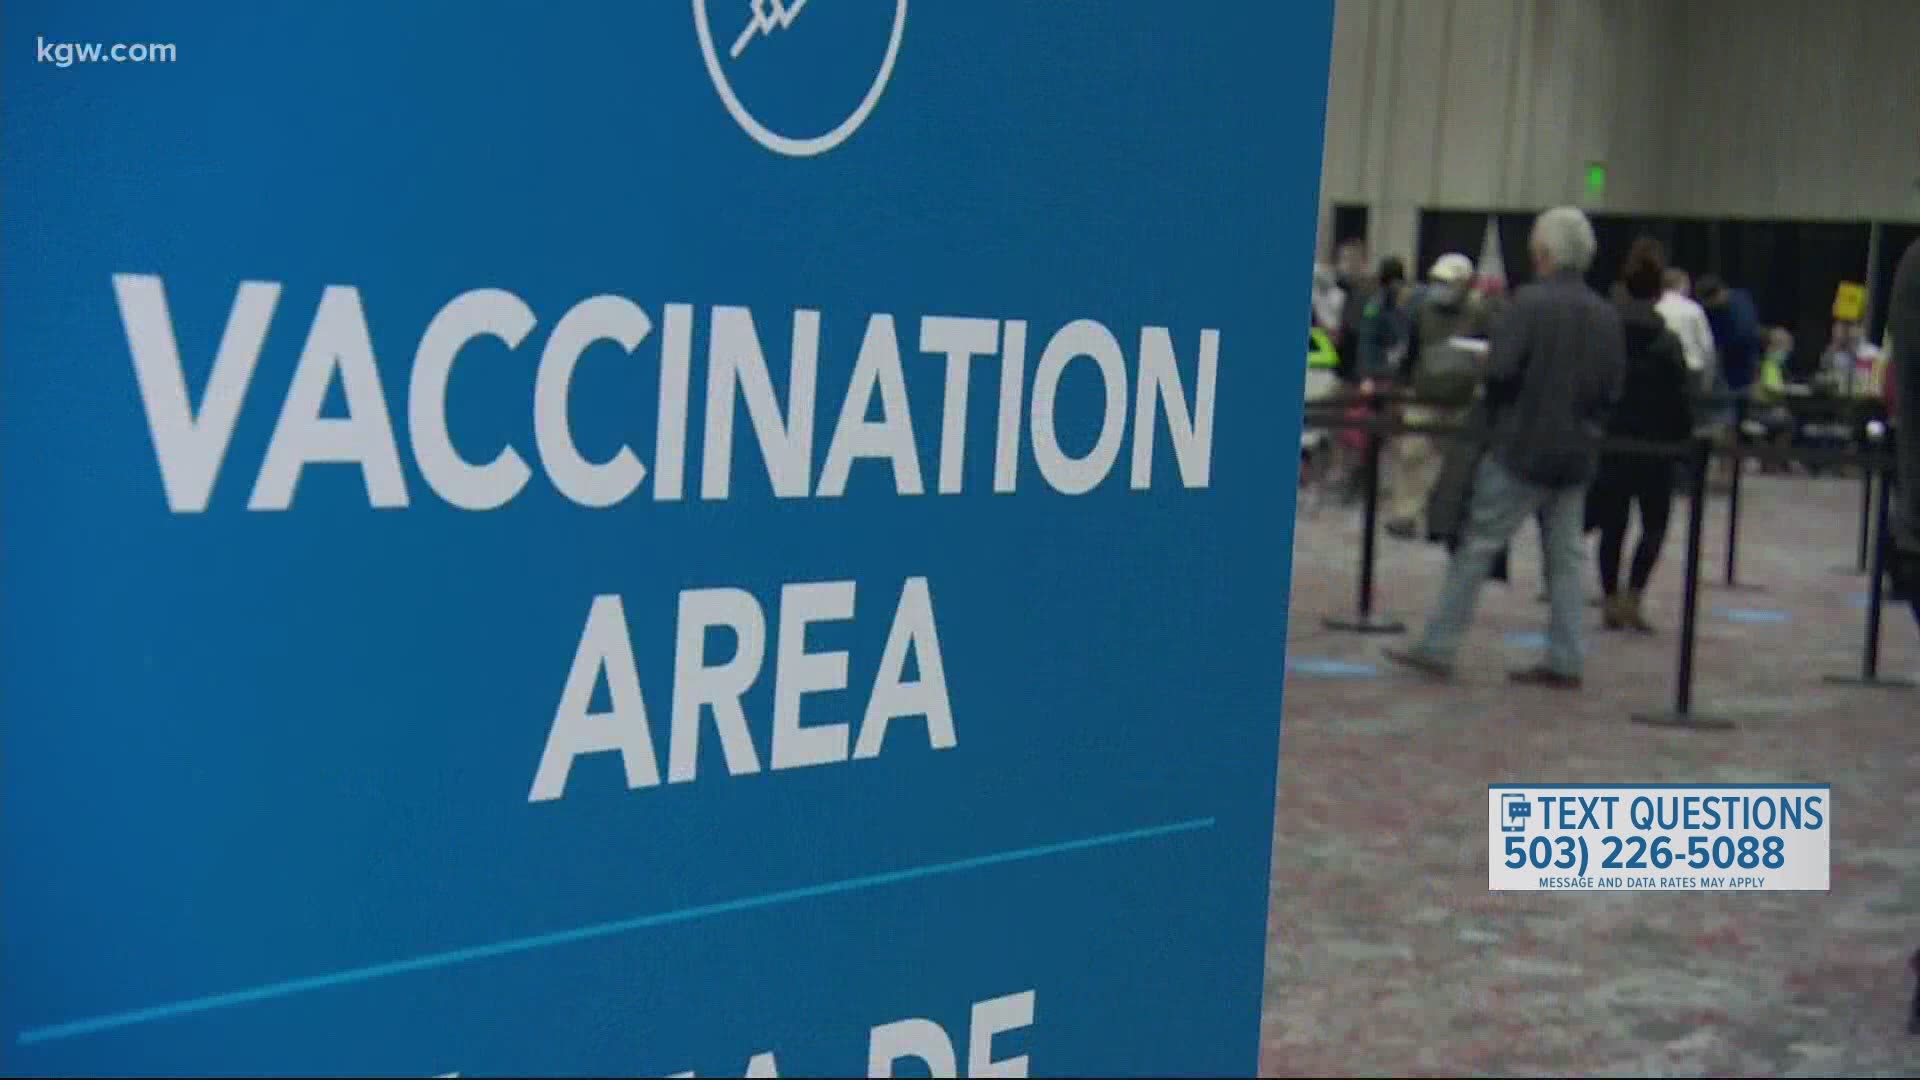 Hospitals say those who are eligible for the vaccine could still wait weeks or months for an appointment. They're concerned the state has not made that clear enough.